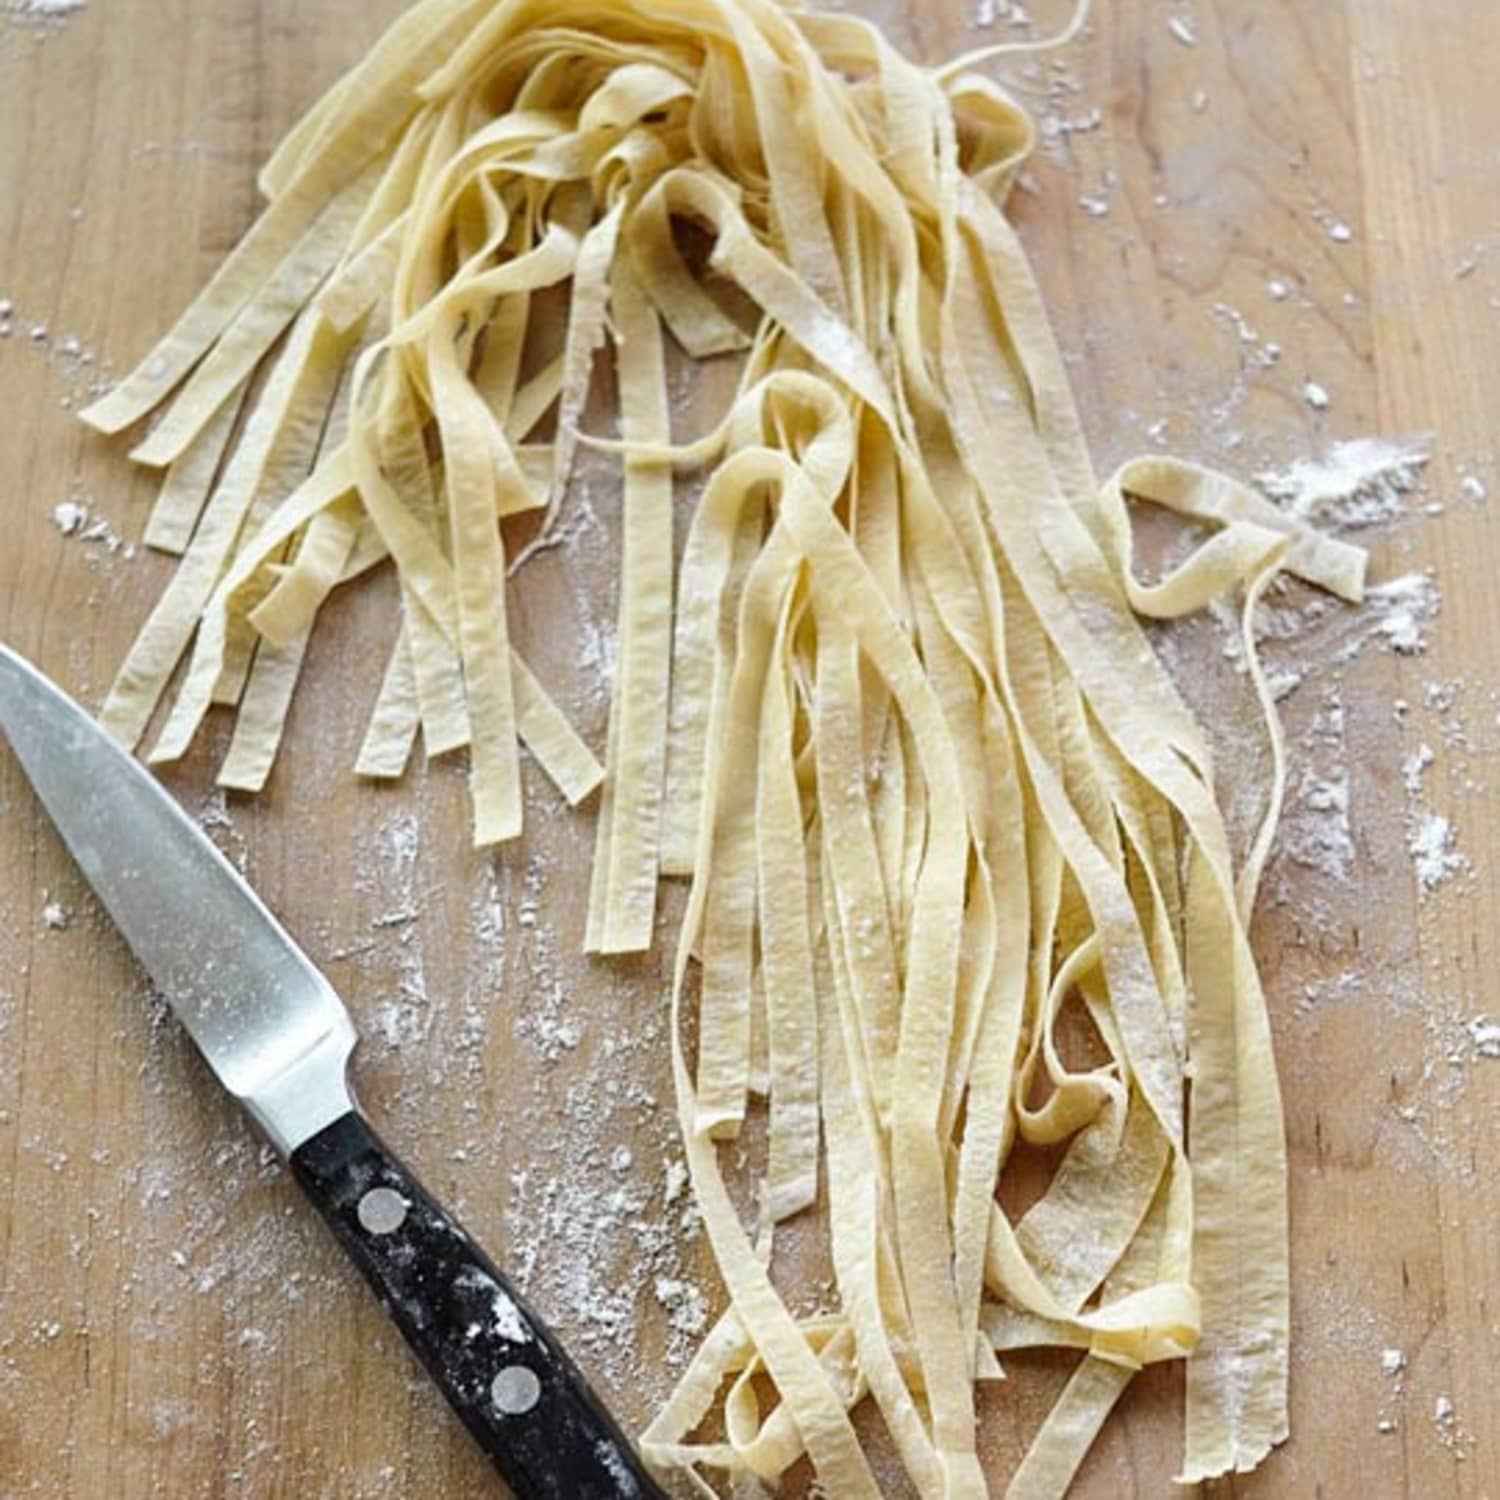 How To Make Fresh Pasta from Scratch | Kitchn